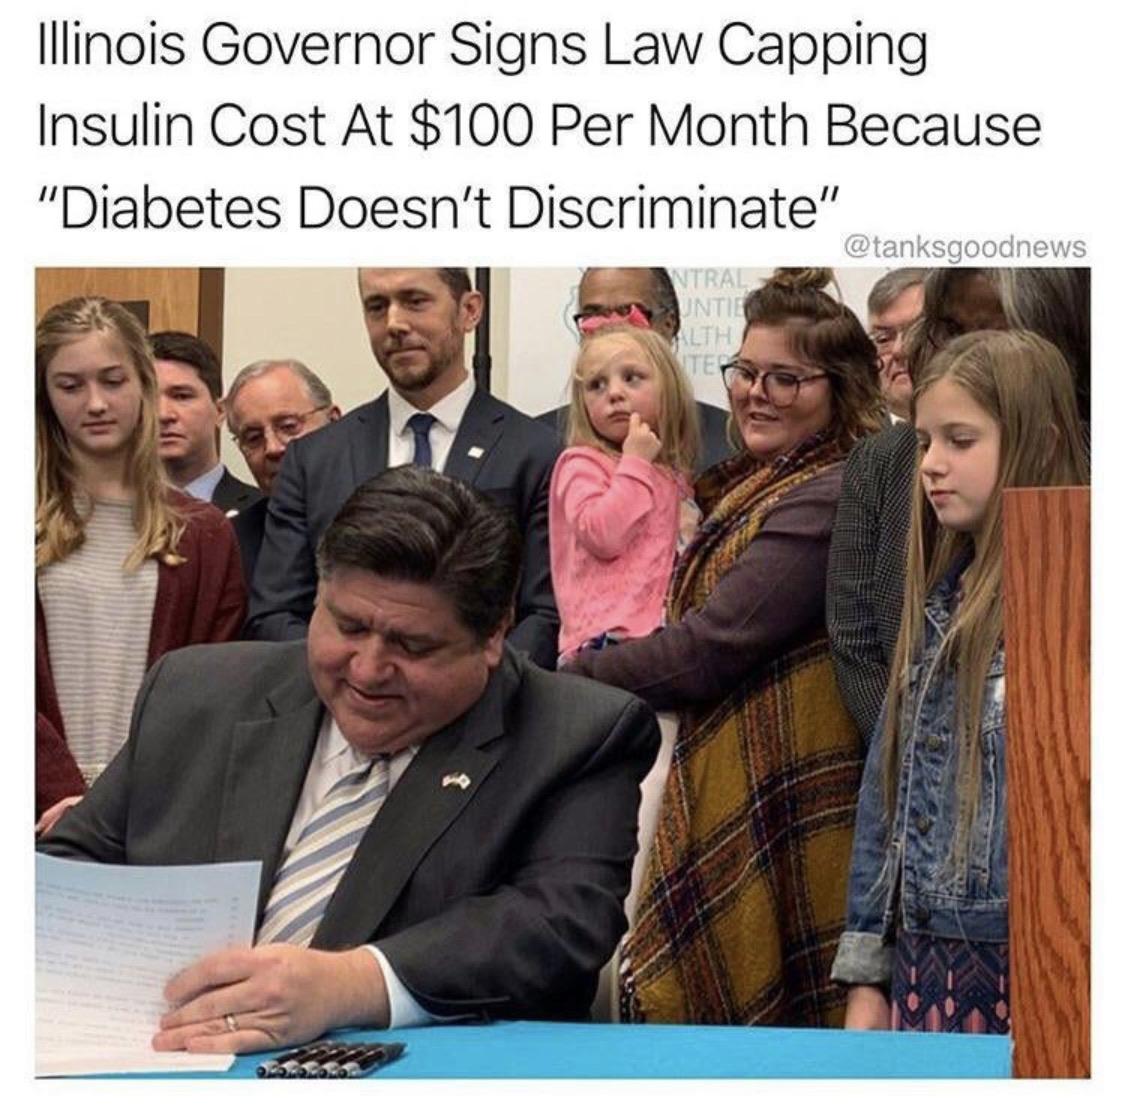 illinois governor signs bill capping insulin costs - Illinois Governor Signs Law Capping Insulin Cost At $100 Per Month Because